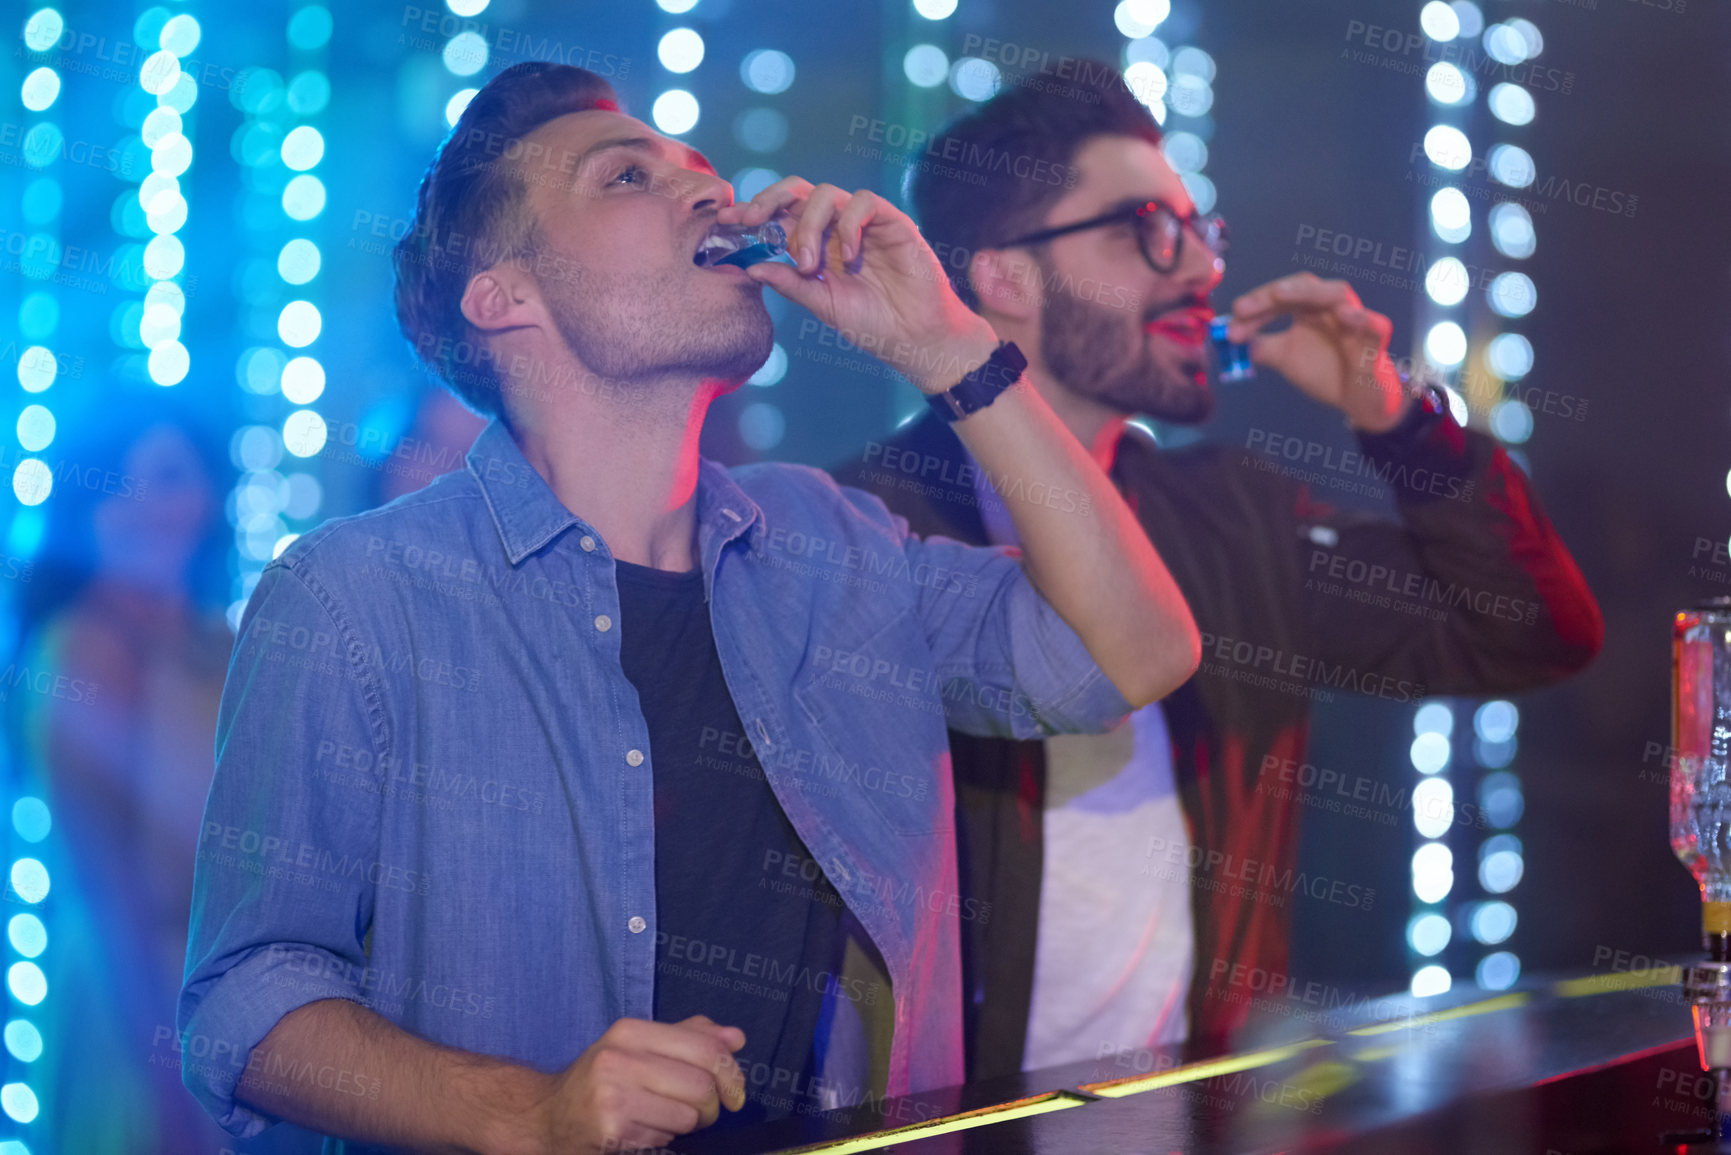 Buy stock photo Shot of two guys drinking shot at the bar counter in a nightclub